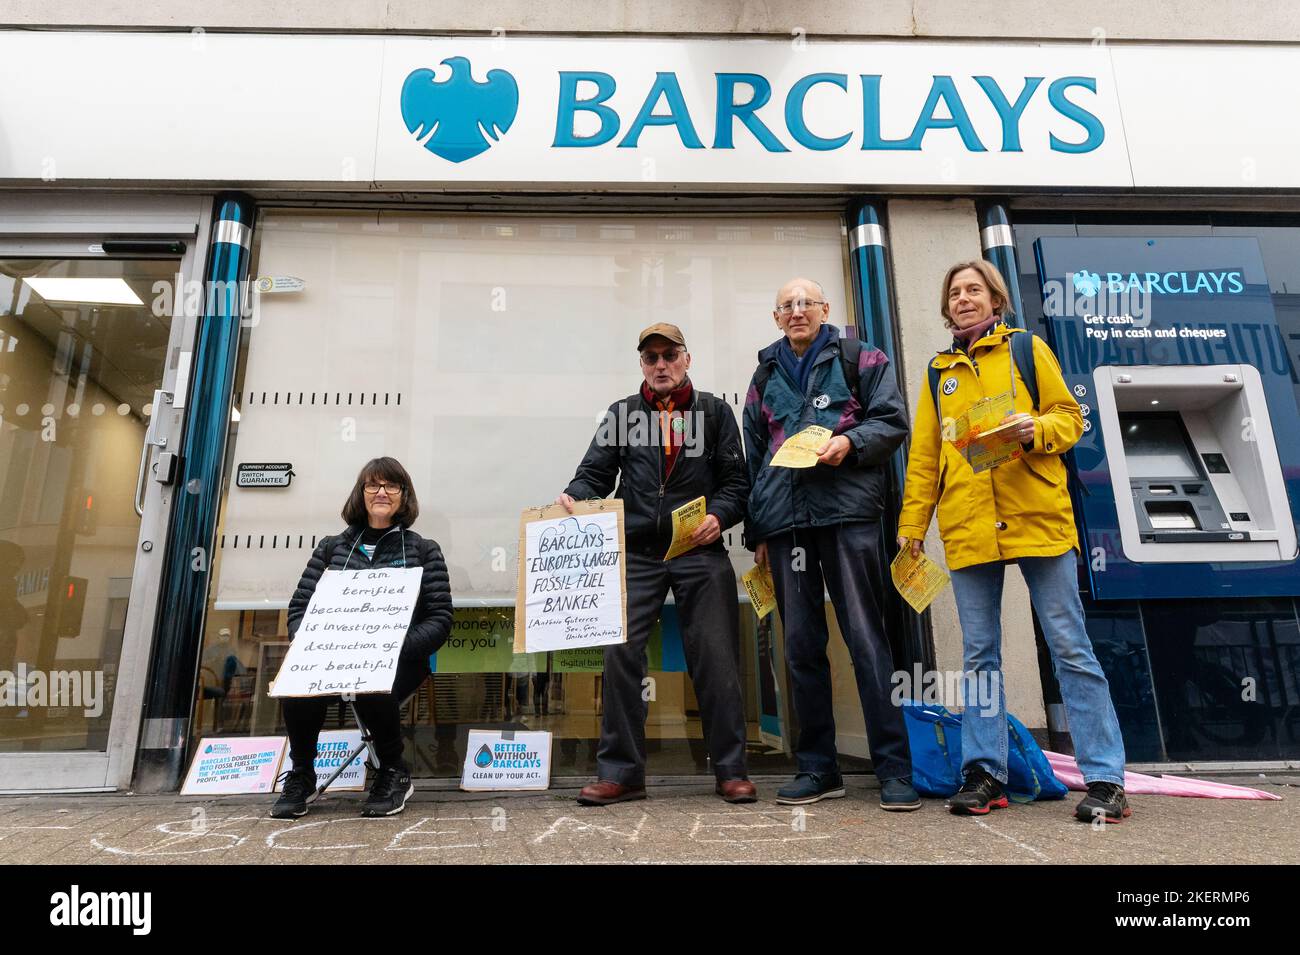 London, UK. 14 November 2022. Climate activists from Extinction Rebellion and Money Rebellion protest outside Barclays branch in Tooting, south London, in a UK wide campaign called 'Better without Barclays. Protesters are holding a placard that denounce Barclays investing in fossil fuels. Credit: Andrea Domeniconi/Alamy Live News Stock Photo